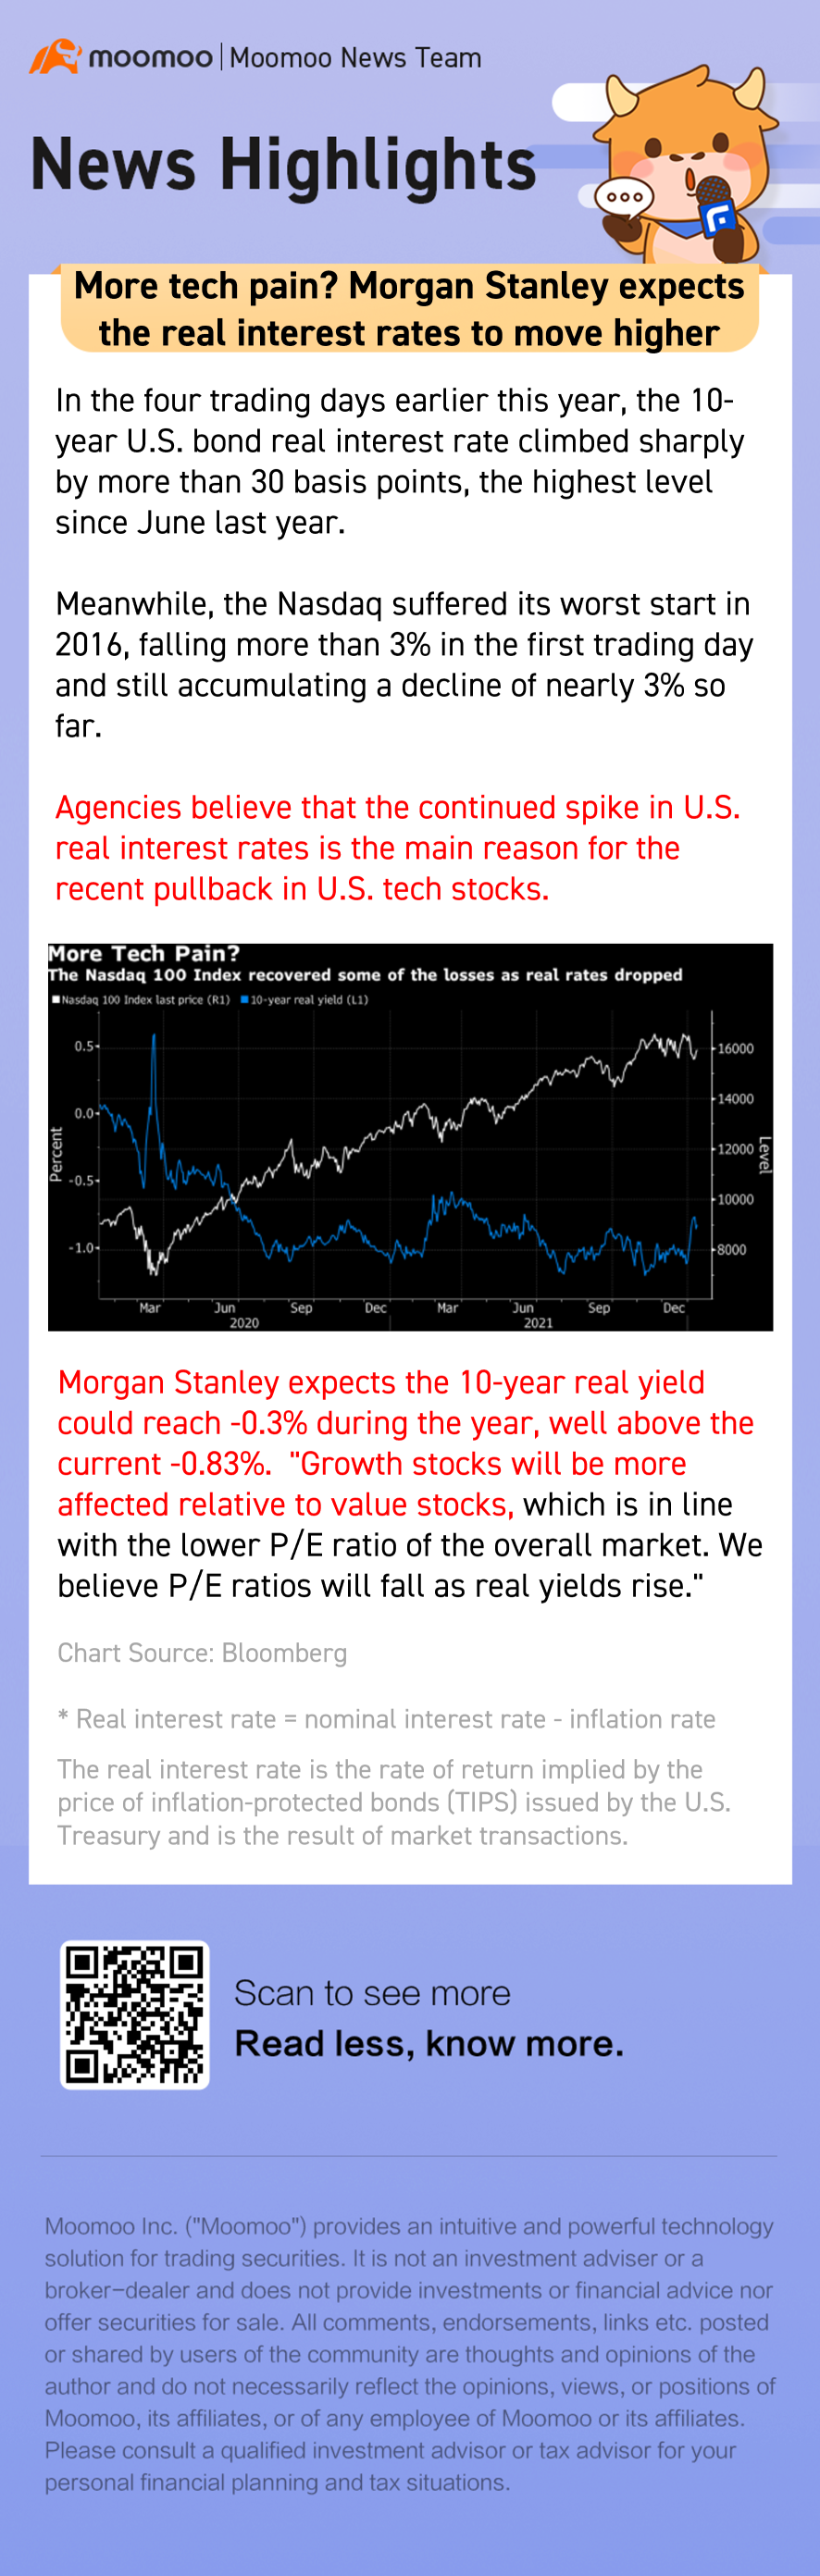 More tech pain? Morgan Stanley expects the real interest rates to move higher